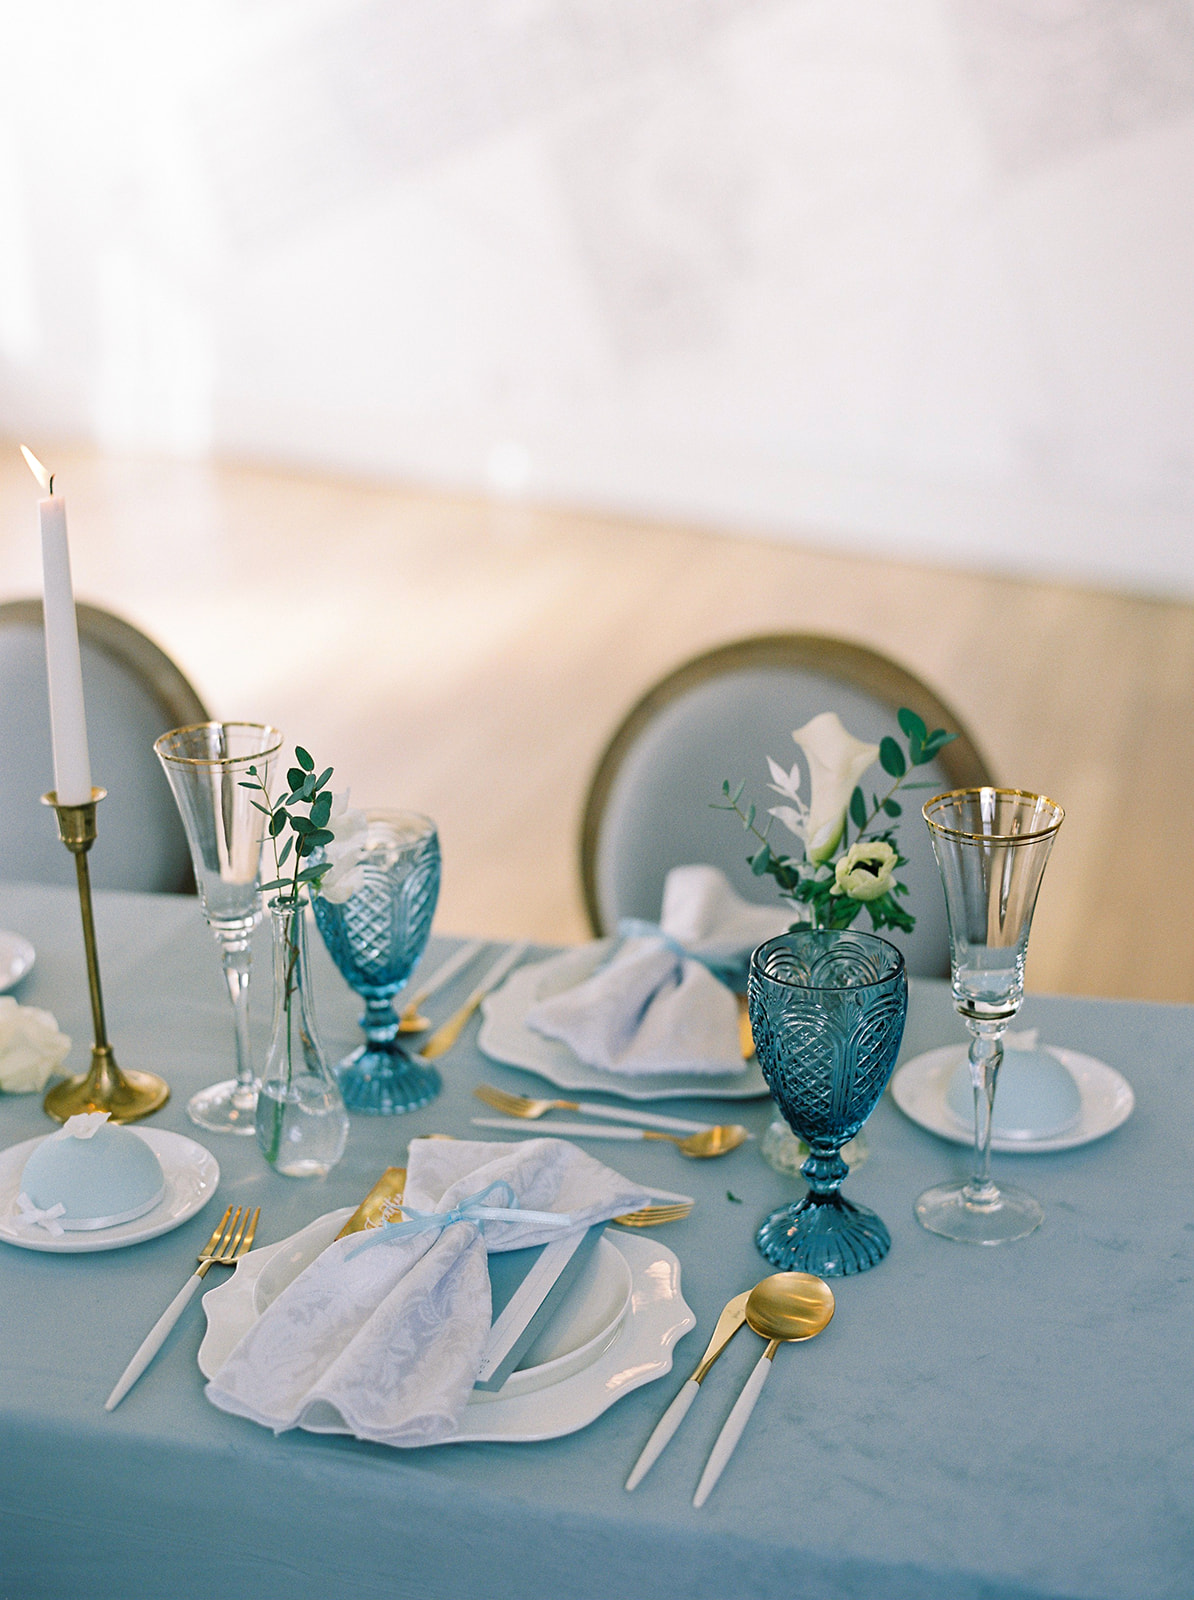 Craving a Paris Getaway? This Parisian Wedding Inspiration Will Transport You To a Quaint Town In France Featured by Brontë Bride, blue wedding palette, wedding decor